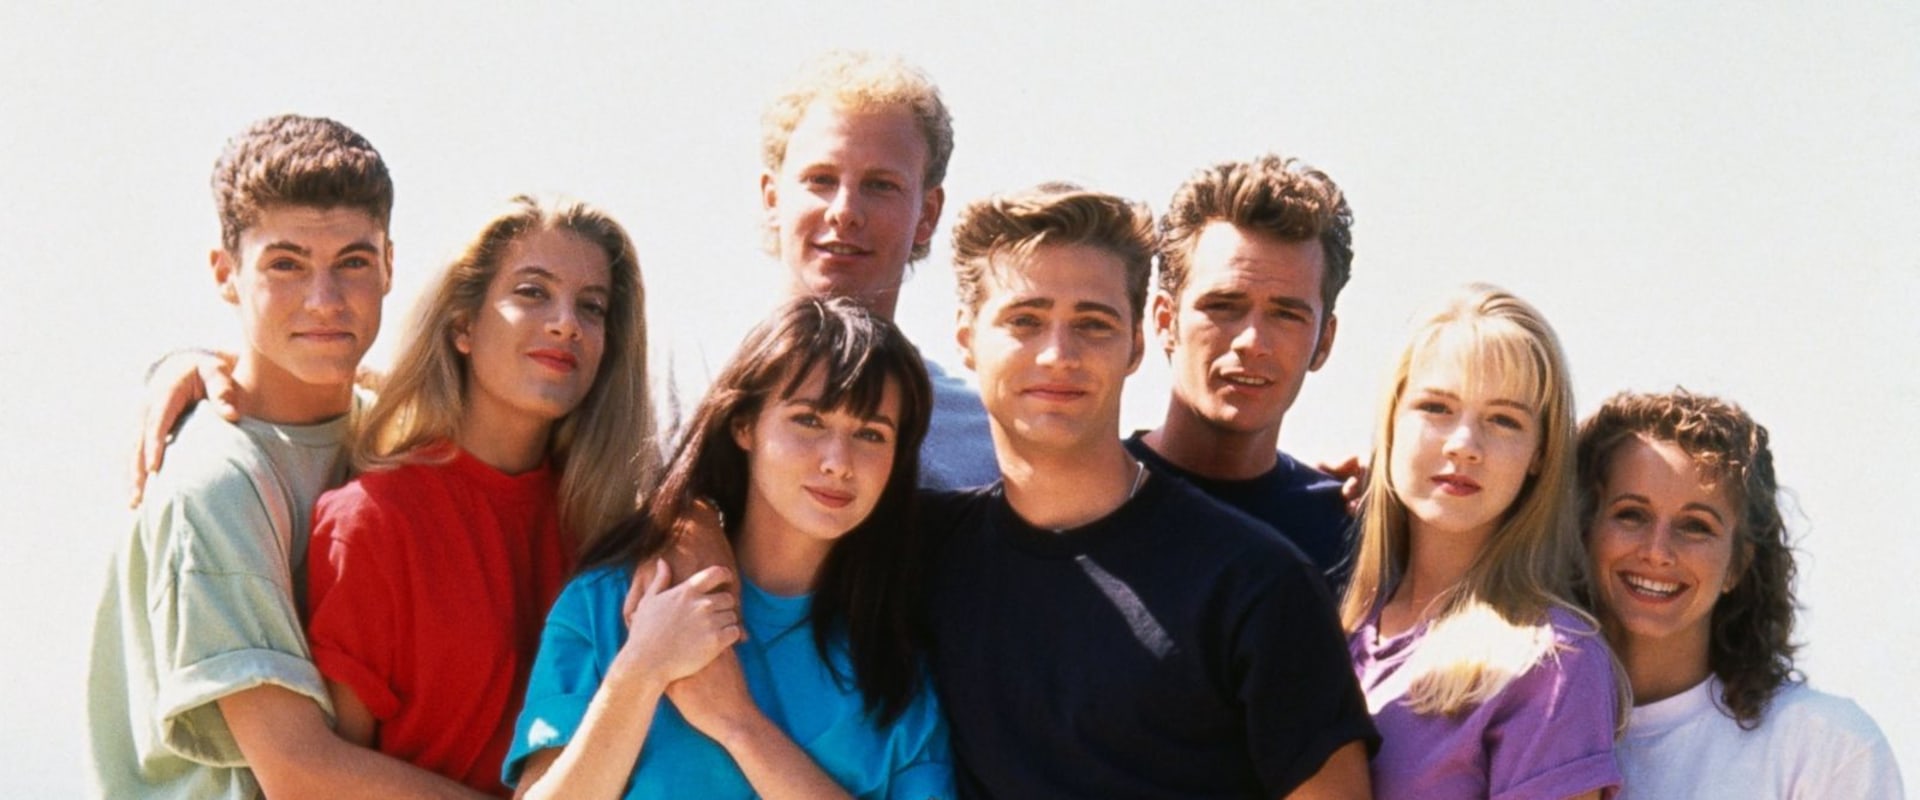 Is 90210 based on beverly hills, 90210?